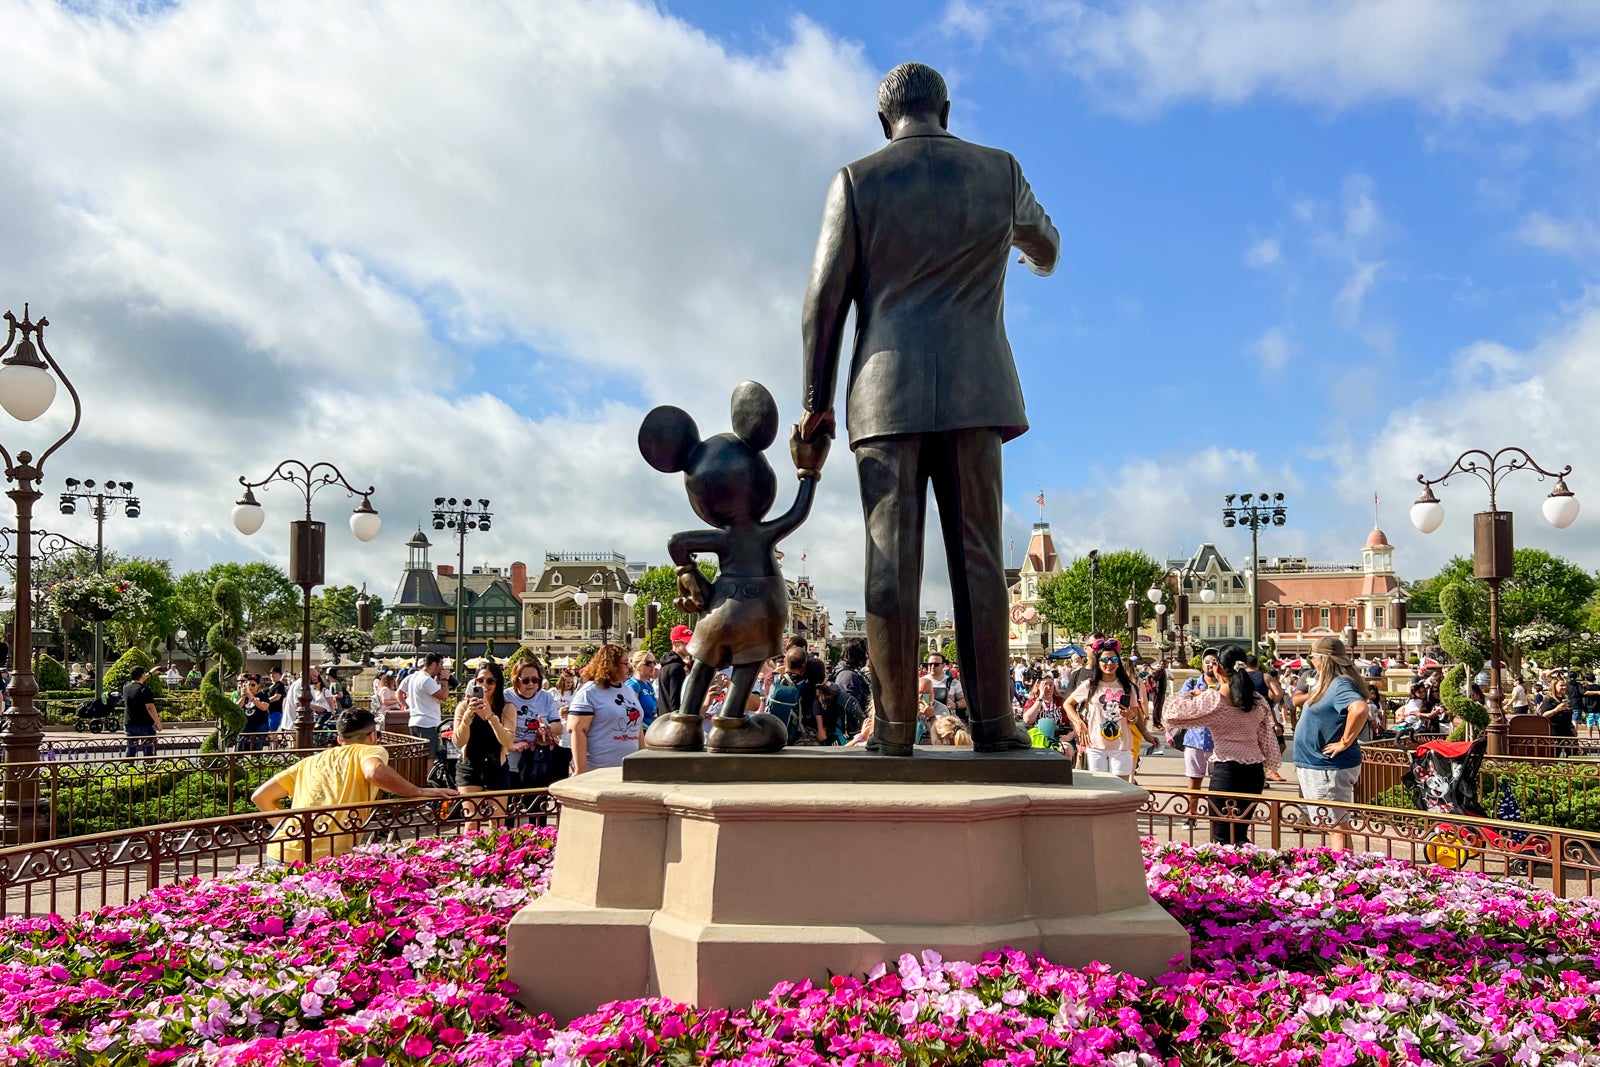 Why A Disney Resort Is Worth Your Hard-Earned Cash